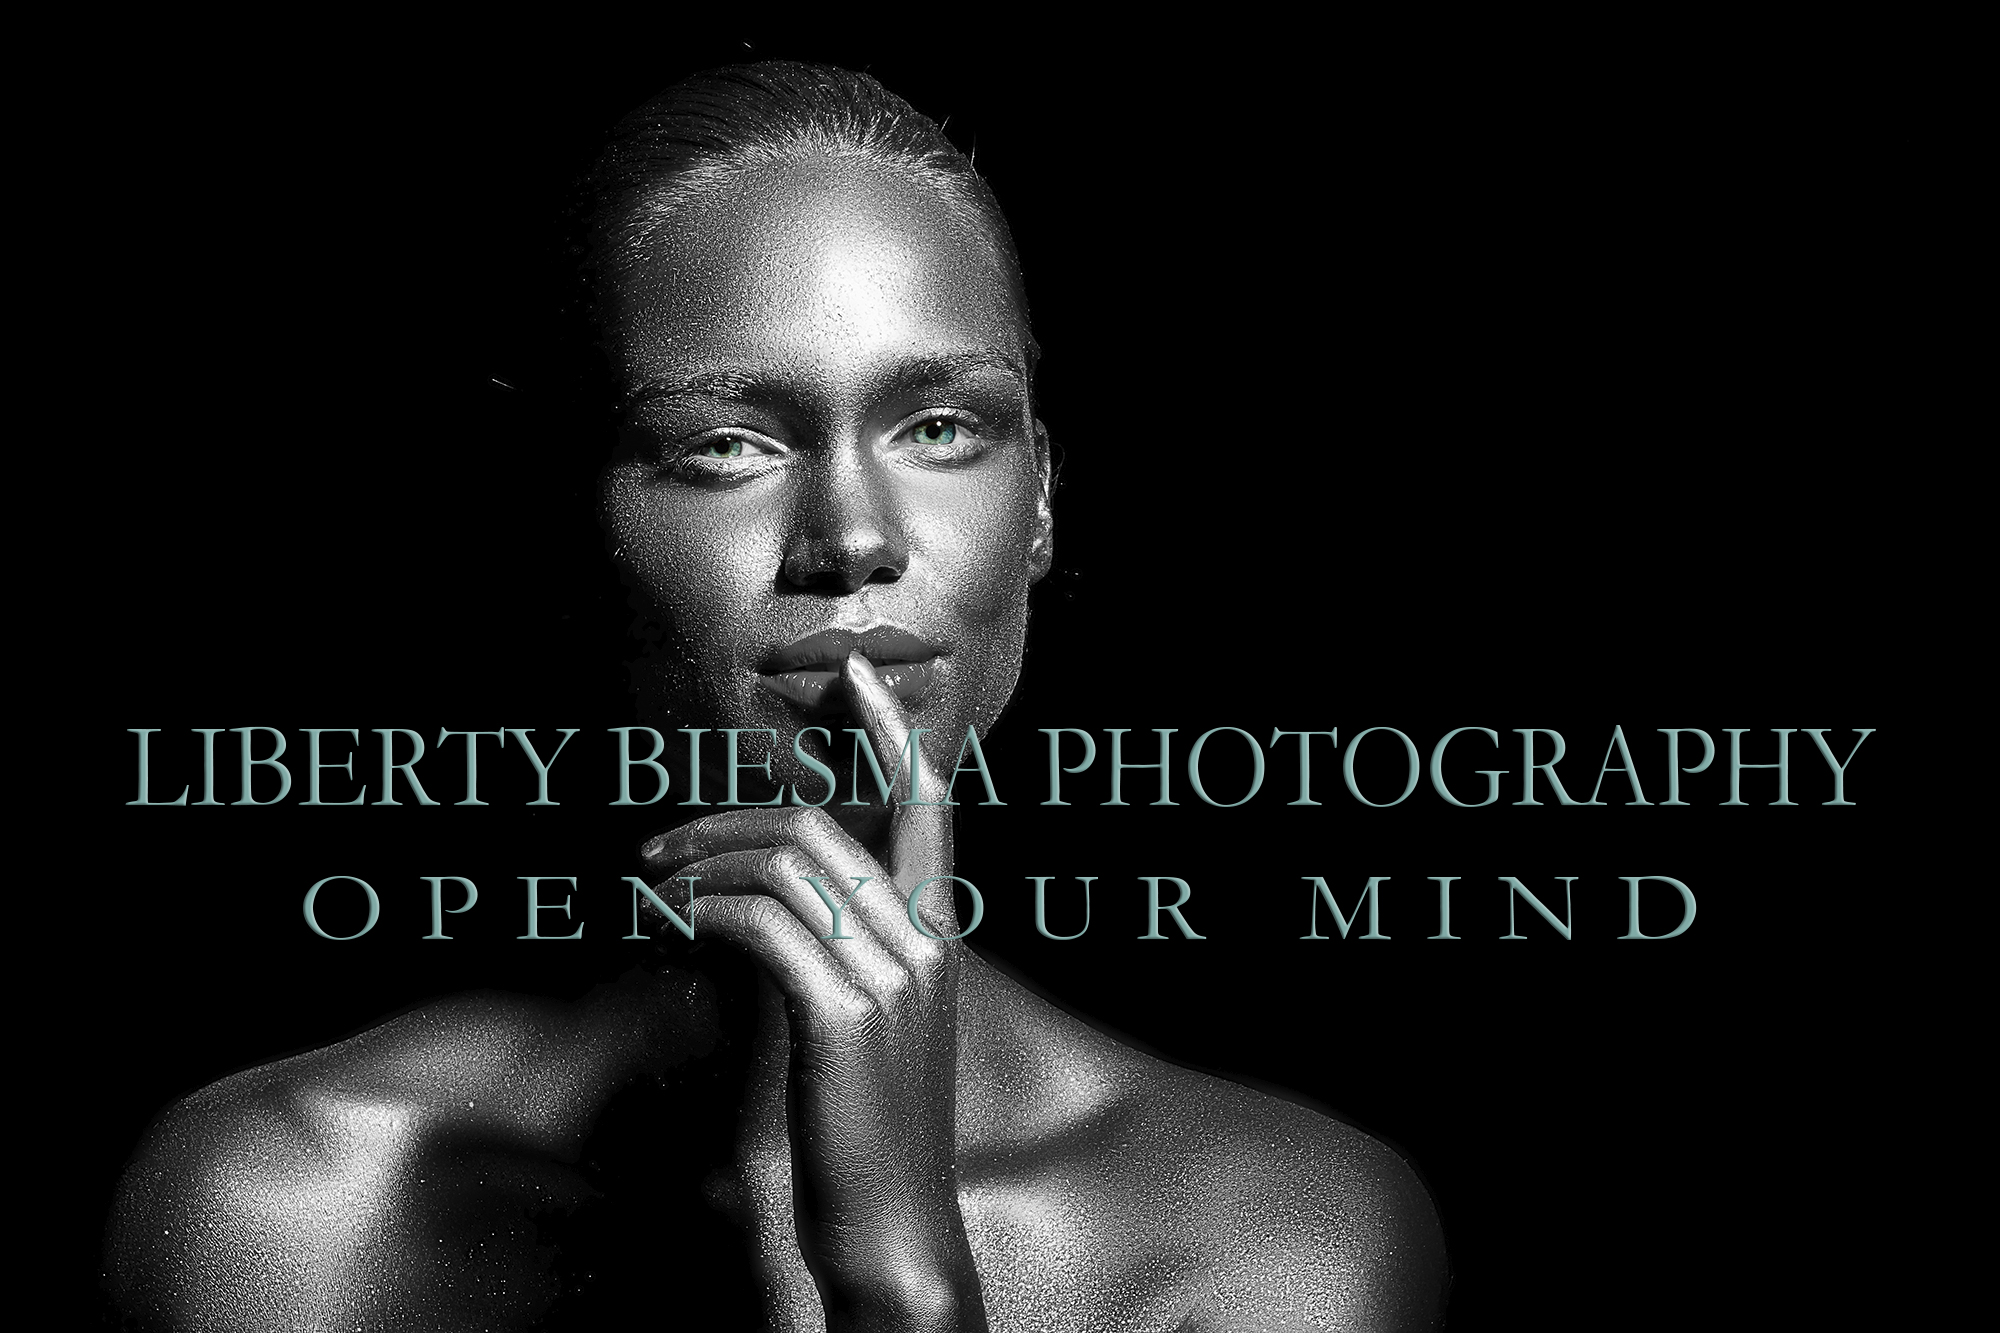 Liberty-Biesma-Photography-Open-your-mind